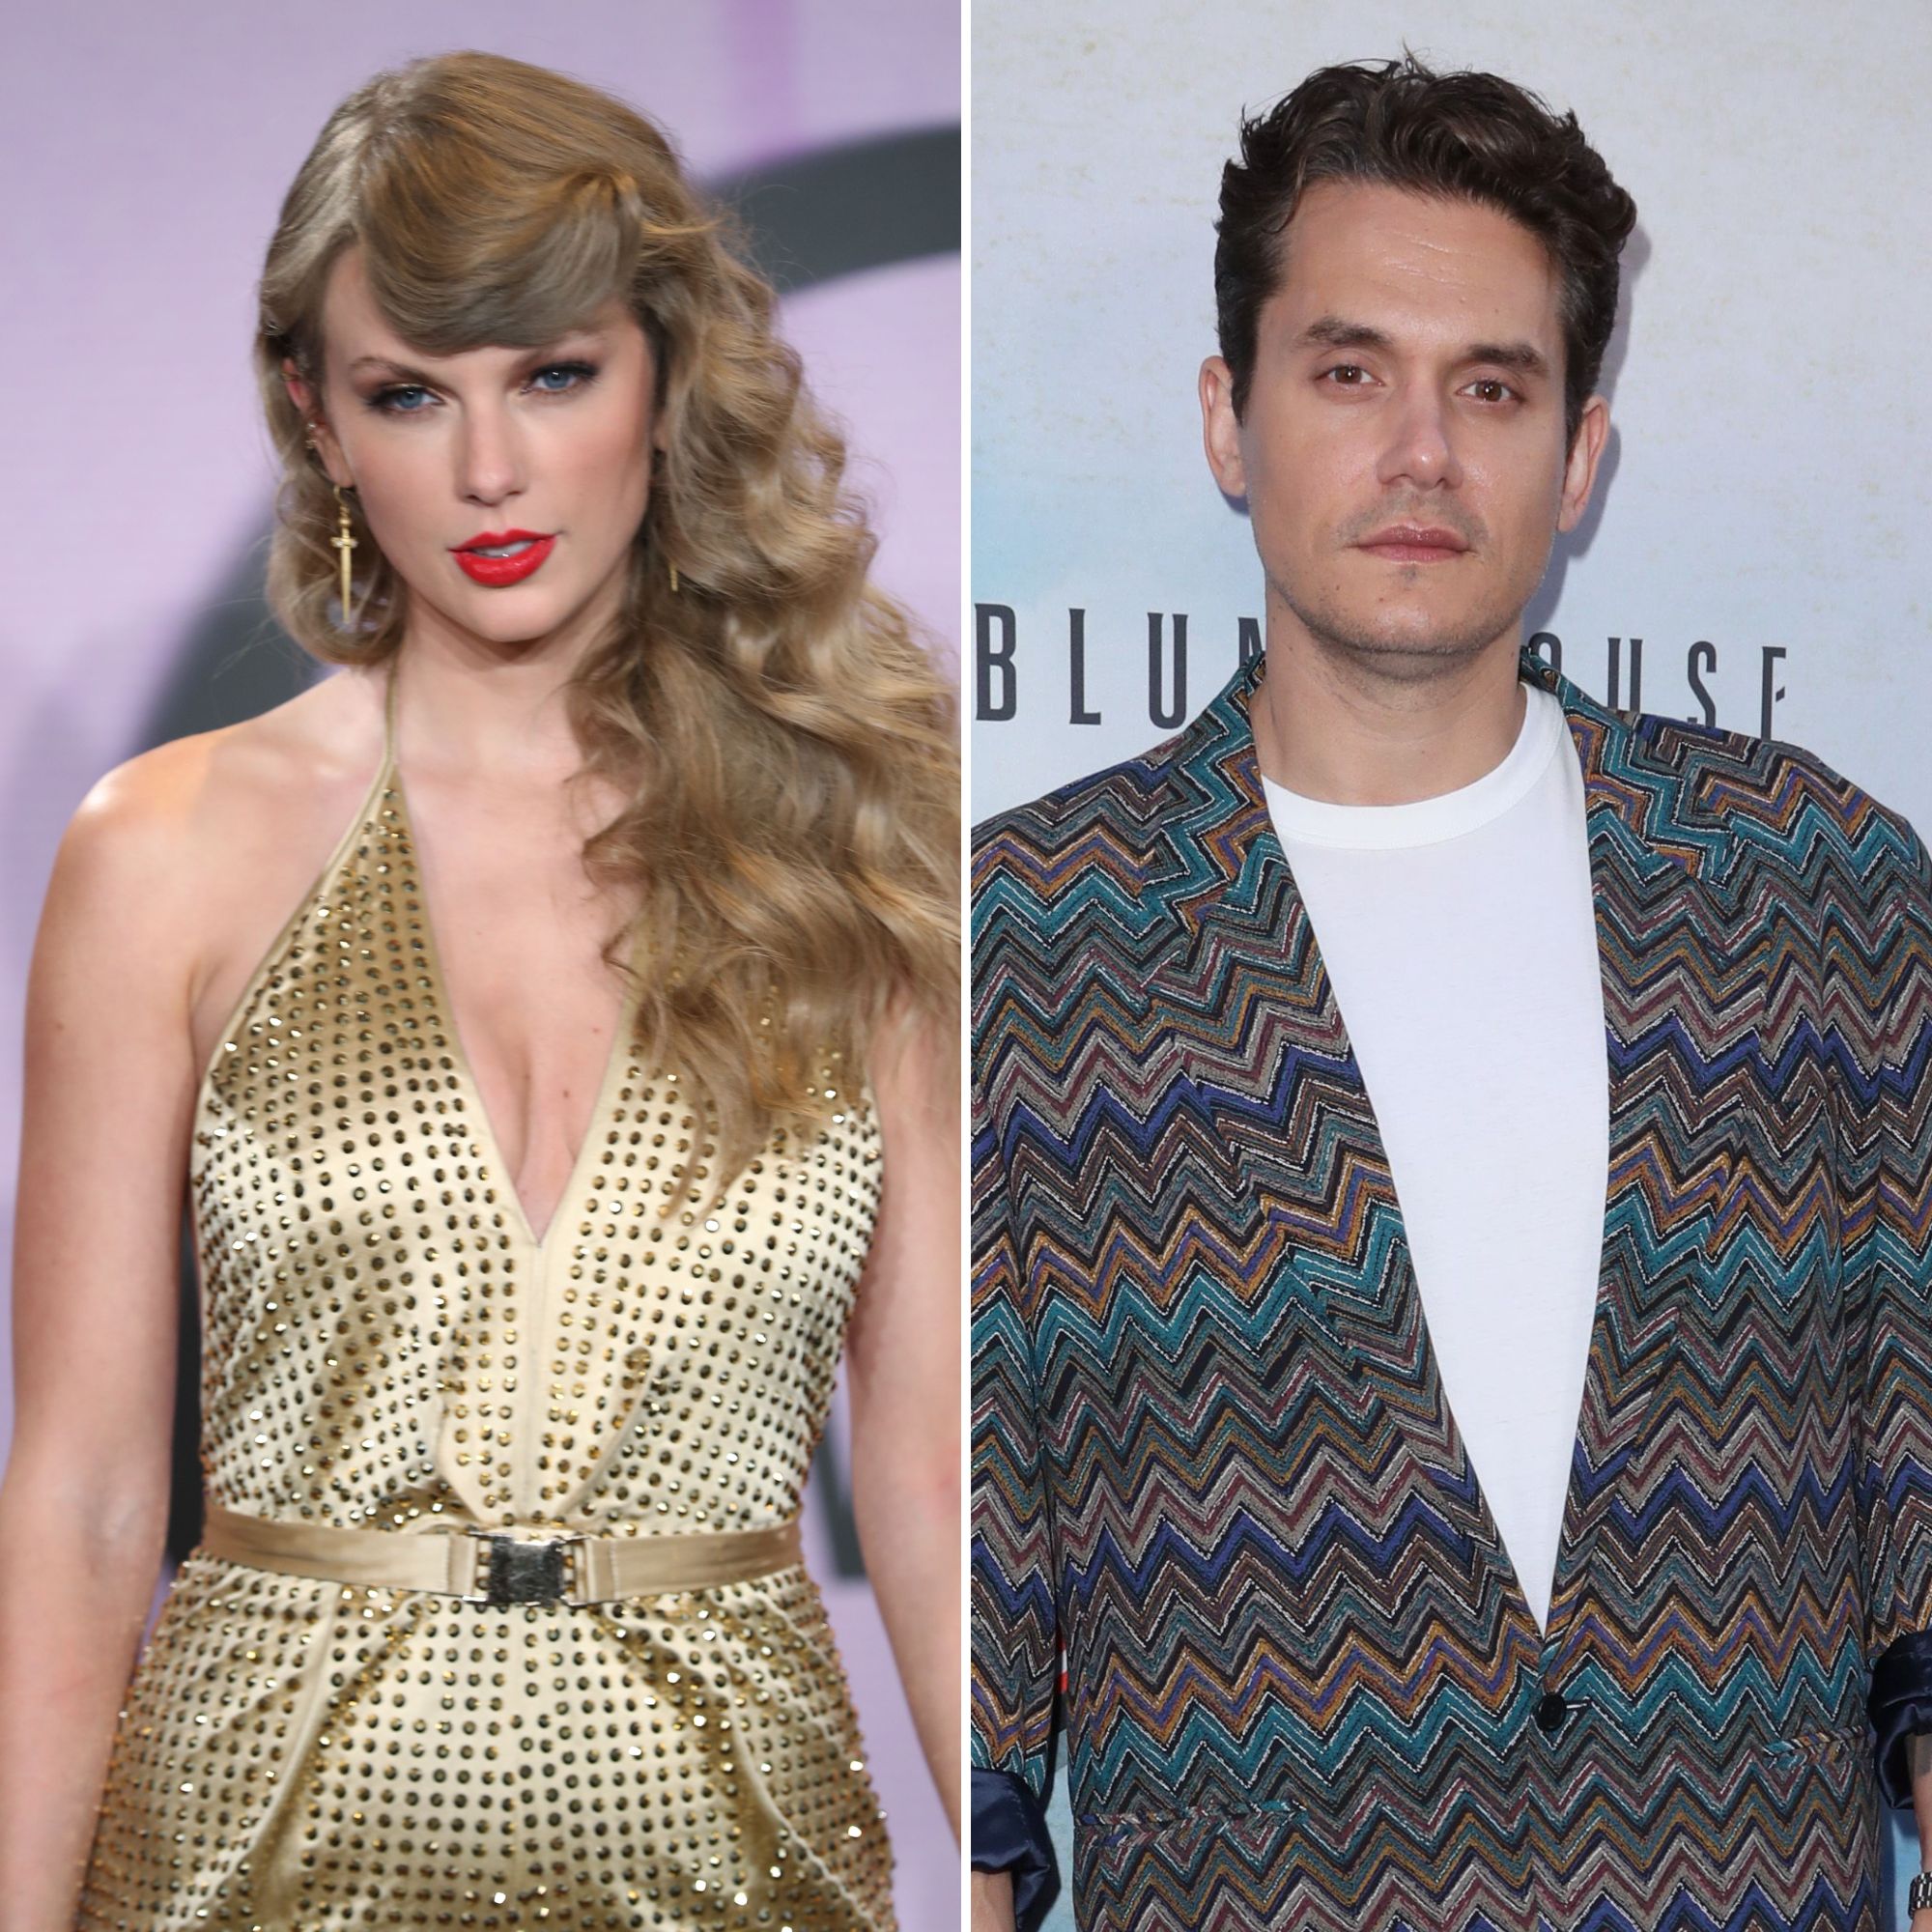 Why Did Taylor Swift and John Mayer Split? Breakup Details